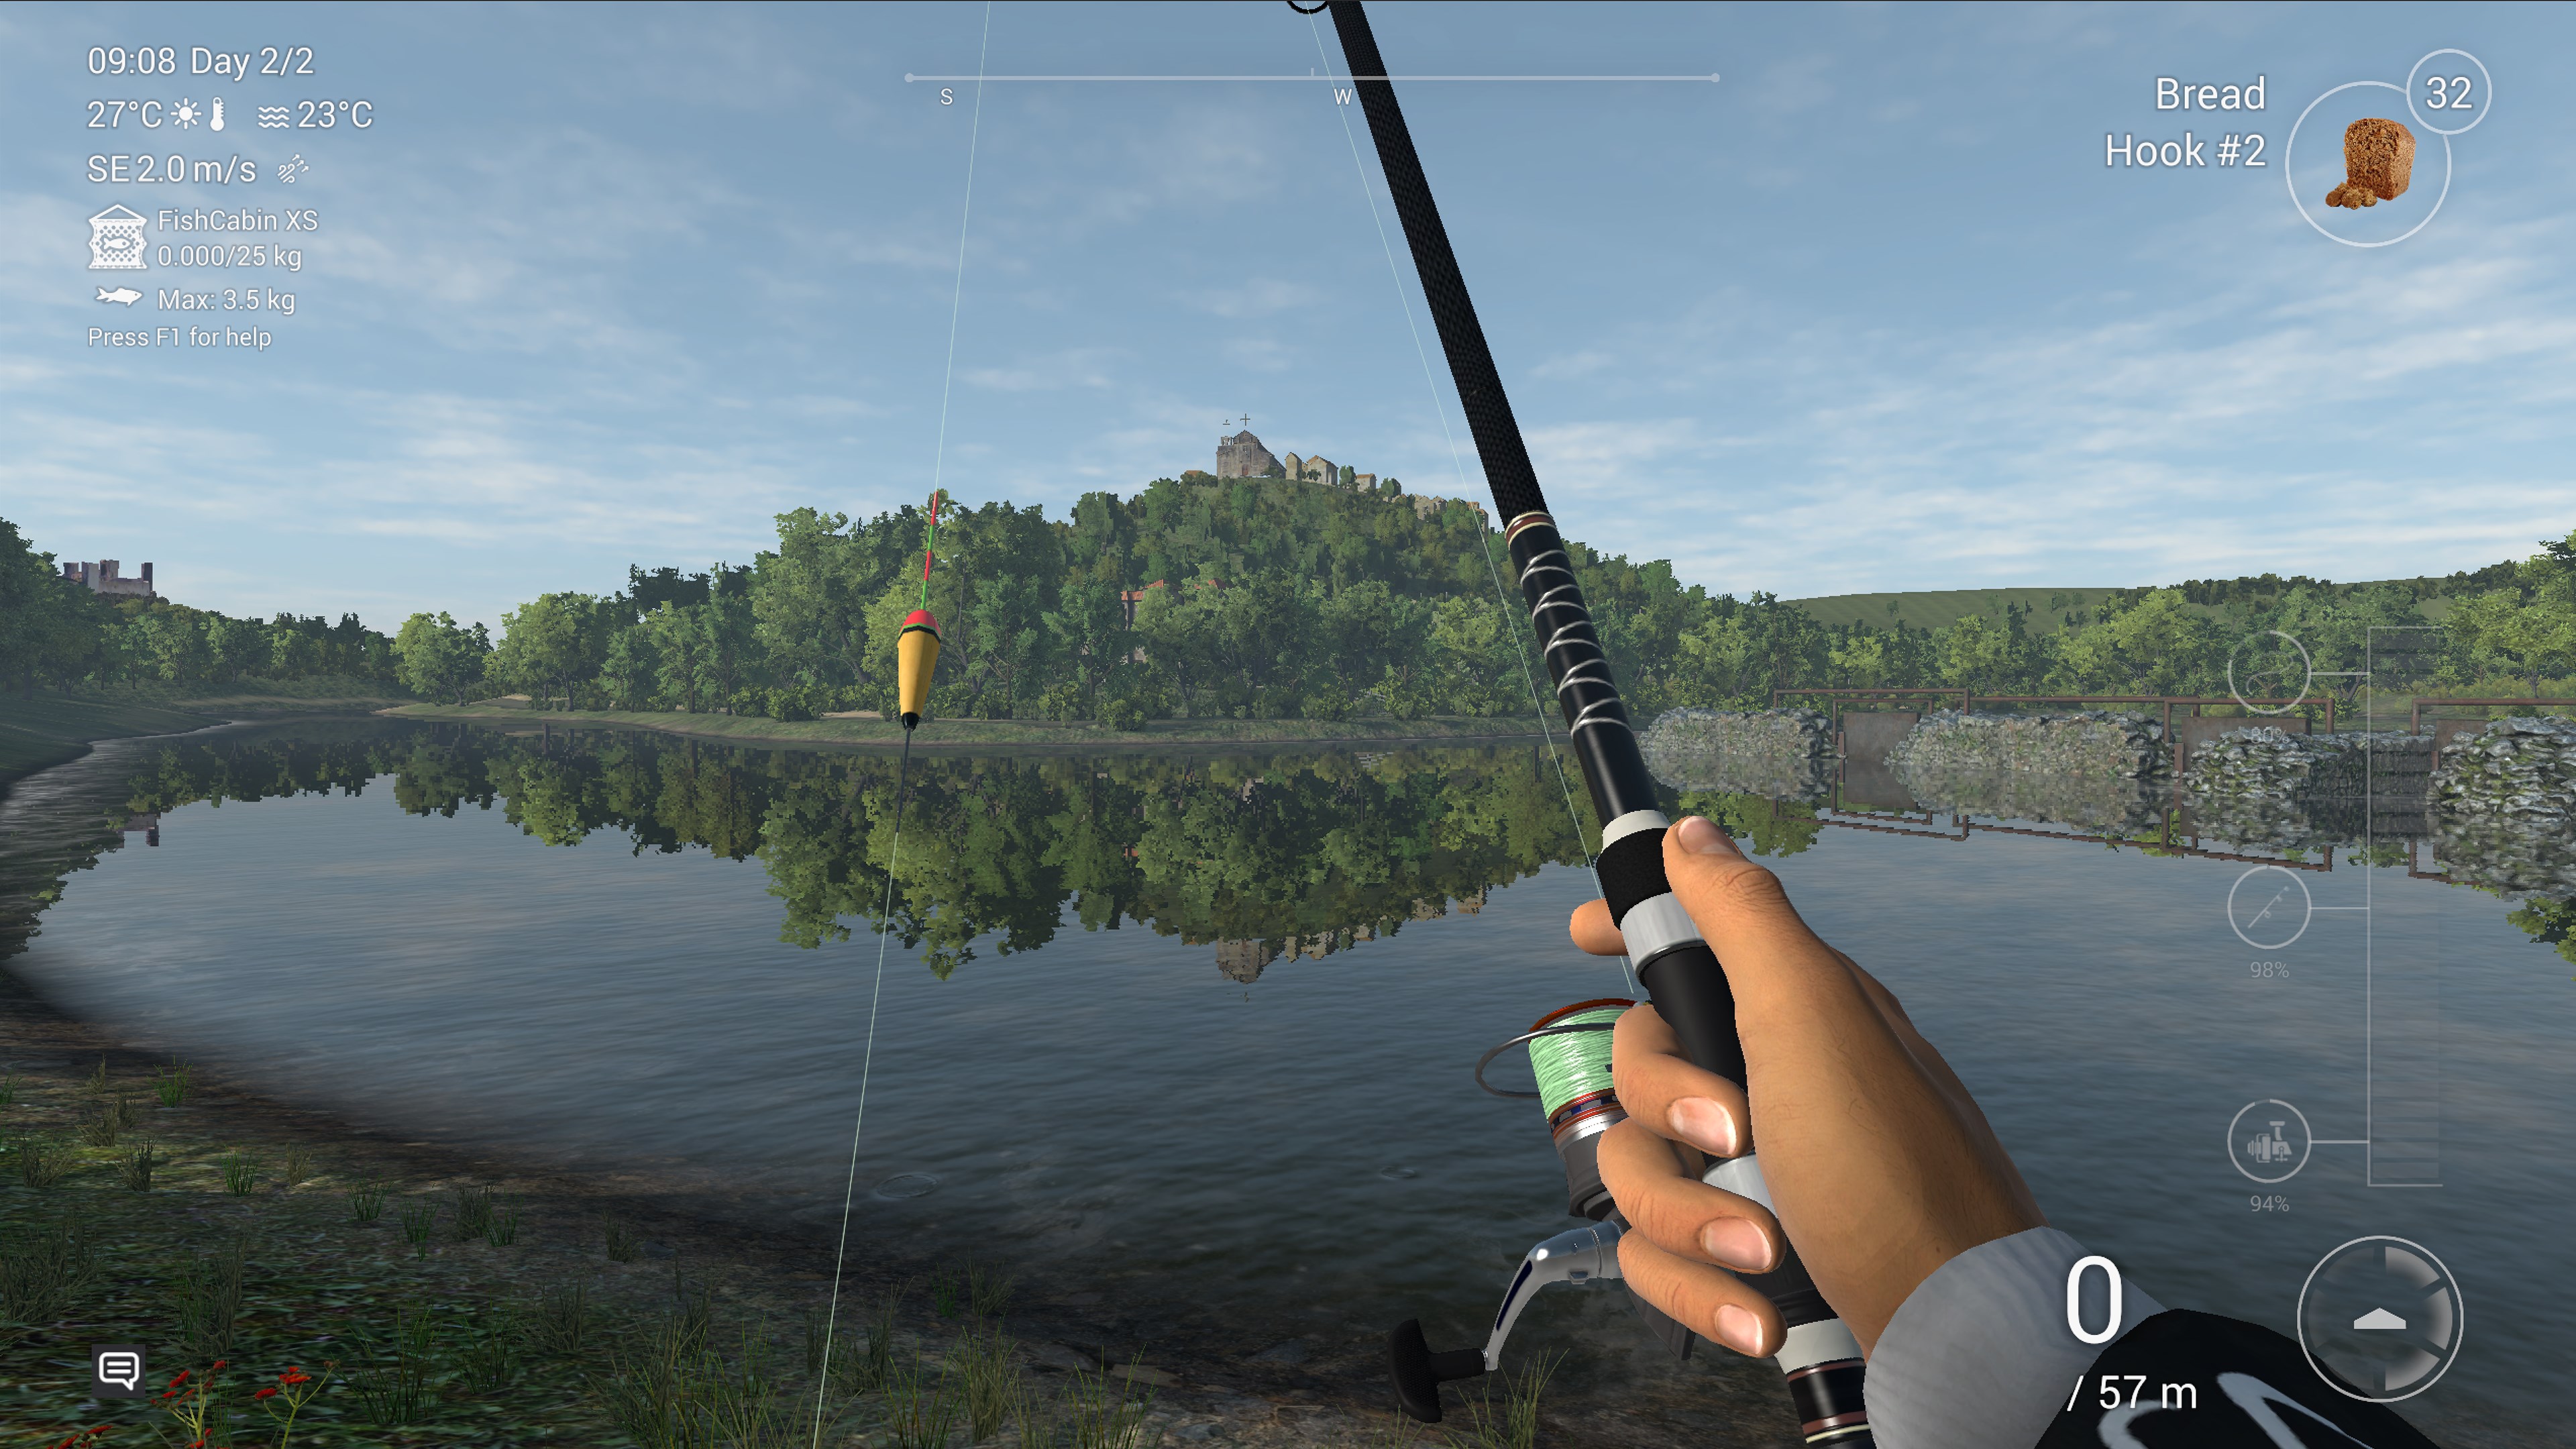 best fishing game xbox one